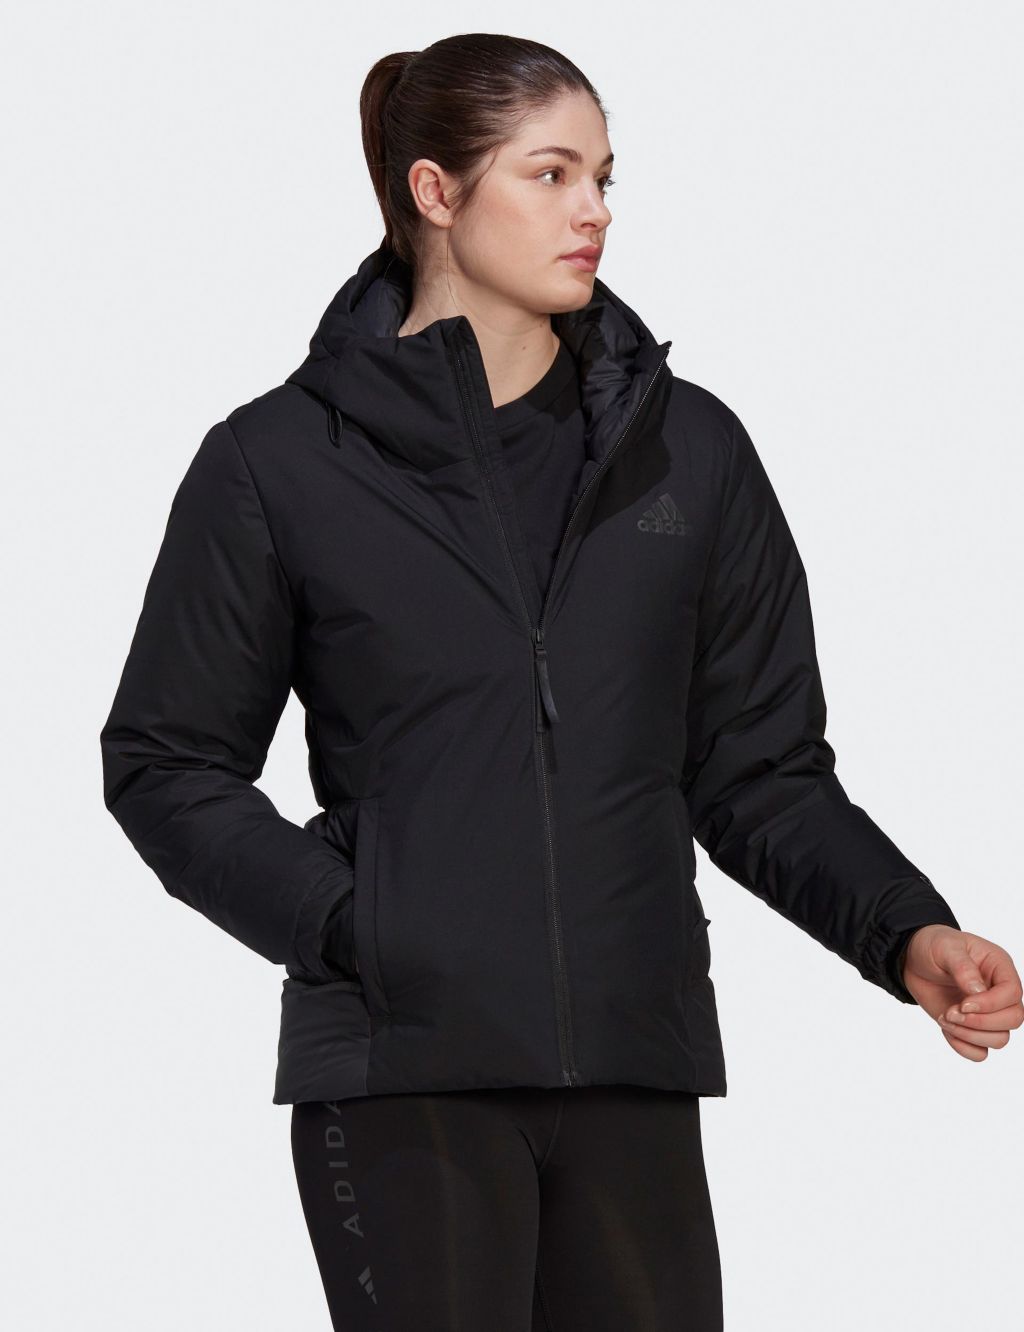 Traveer COLD.RDY Sports Jacket image 6